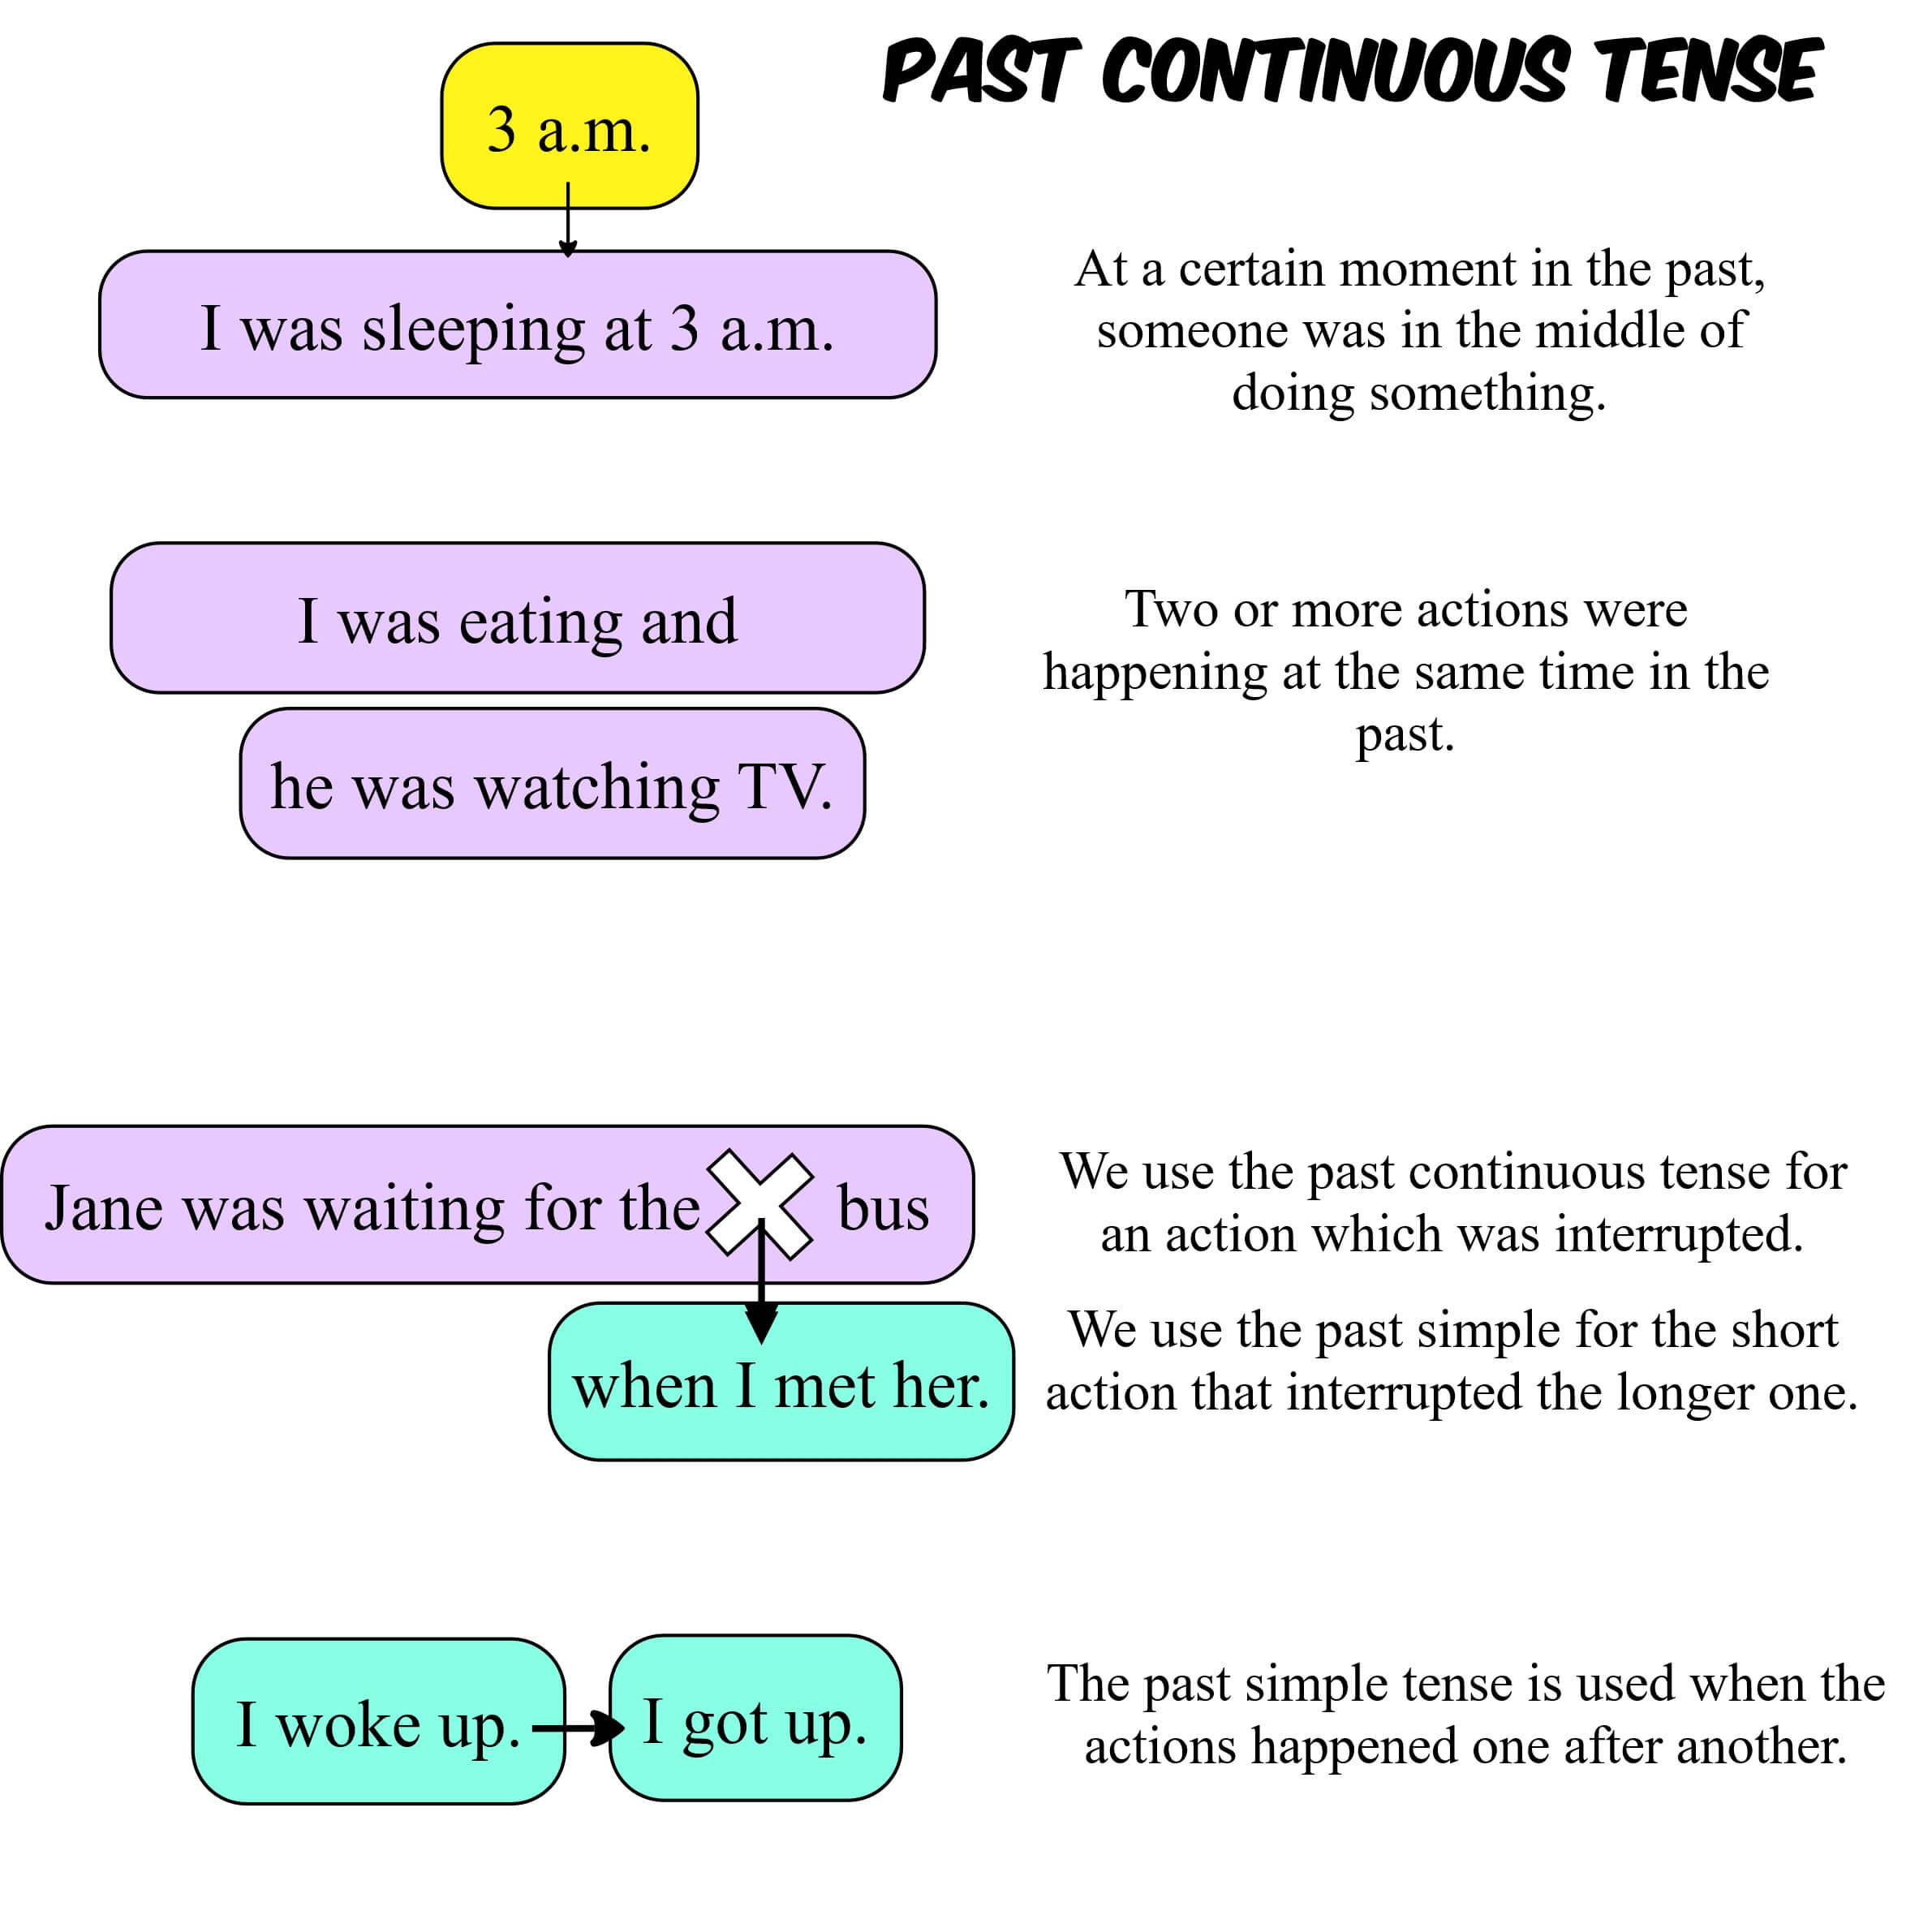 Past continuous usage infographic